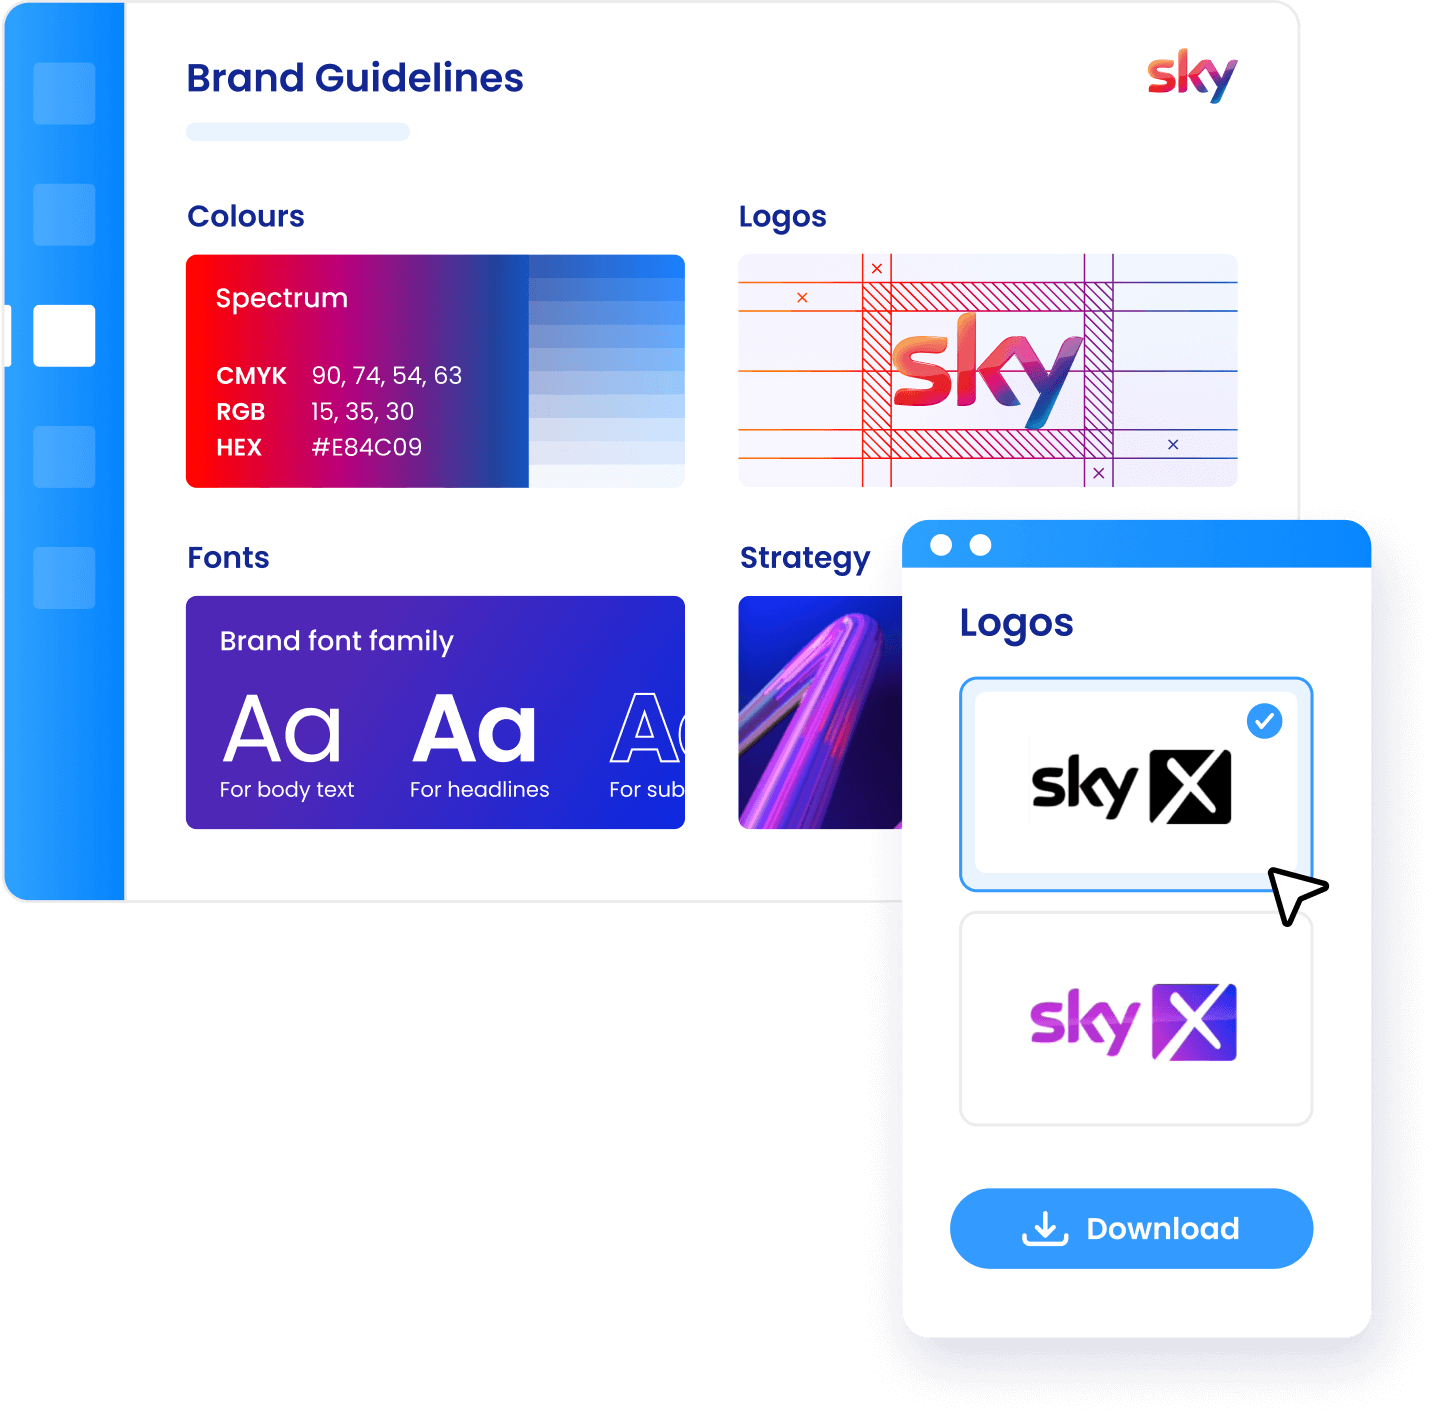 Get instant access to approved core brand elements, assets and campaign guidelines, like Sky has